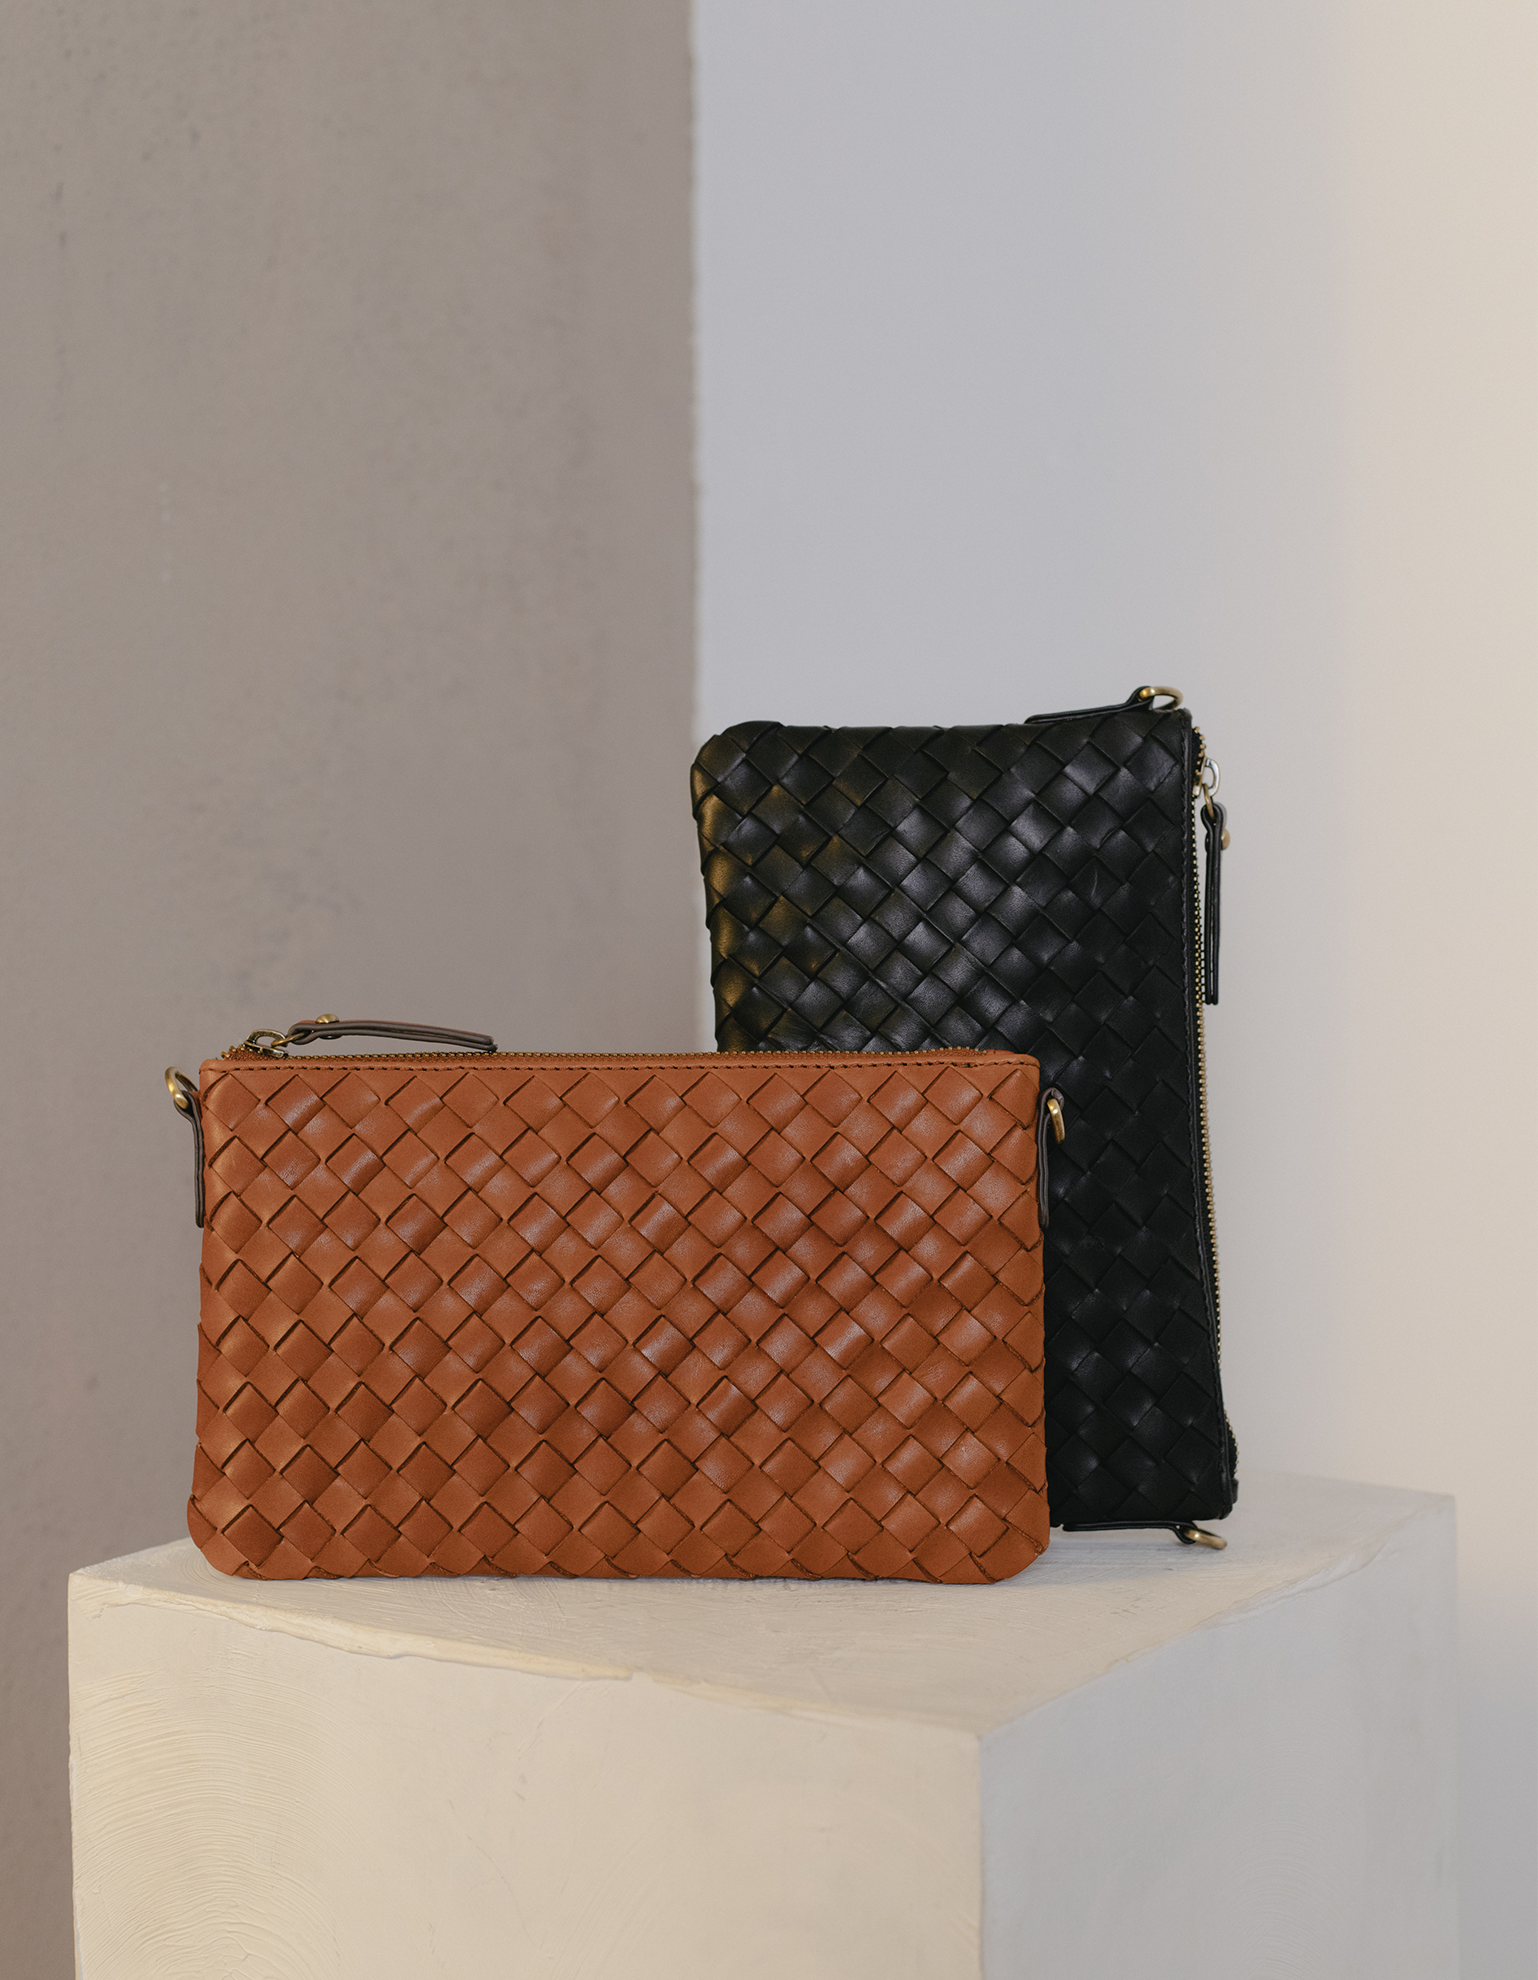 Lexi bags in cognac and black classic woven leather